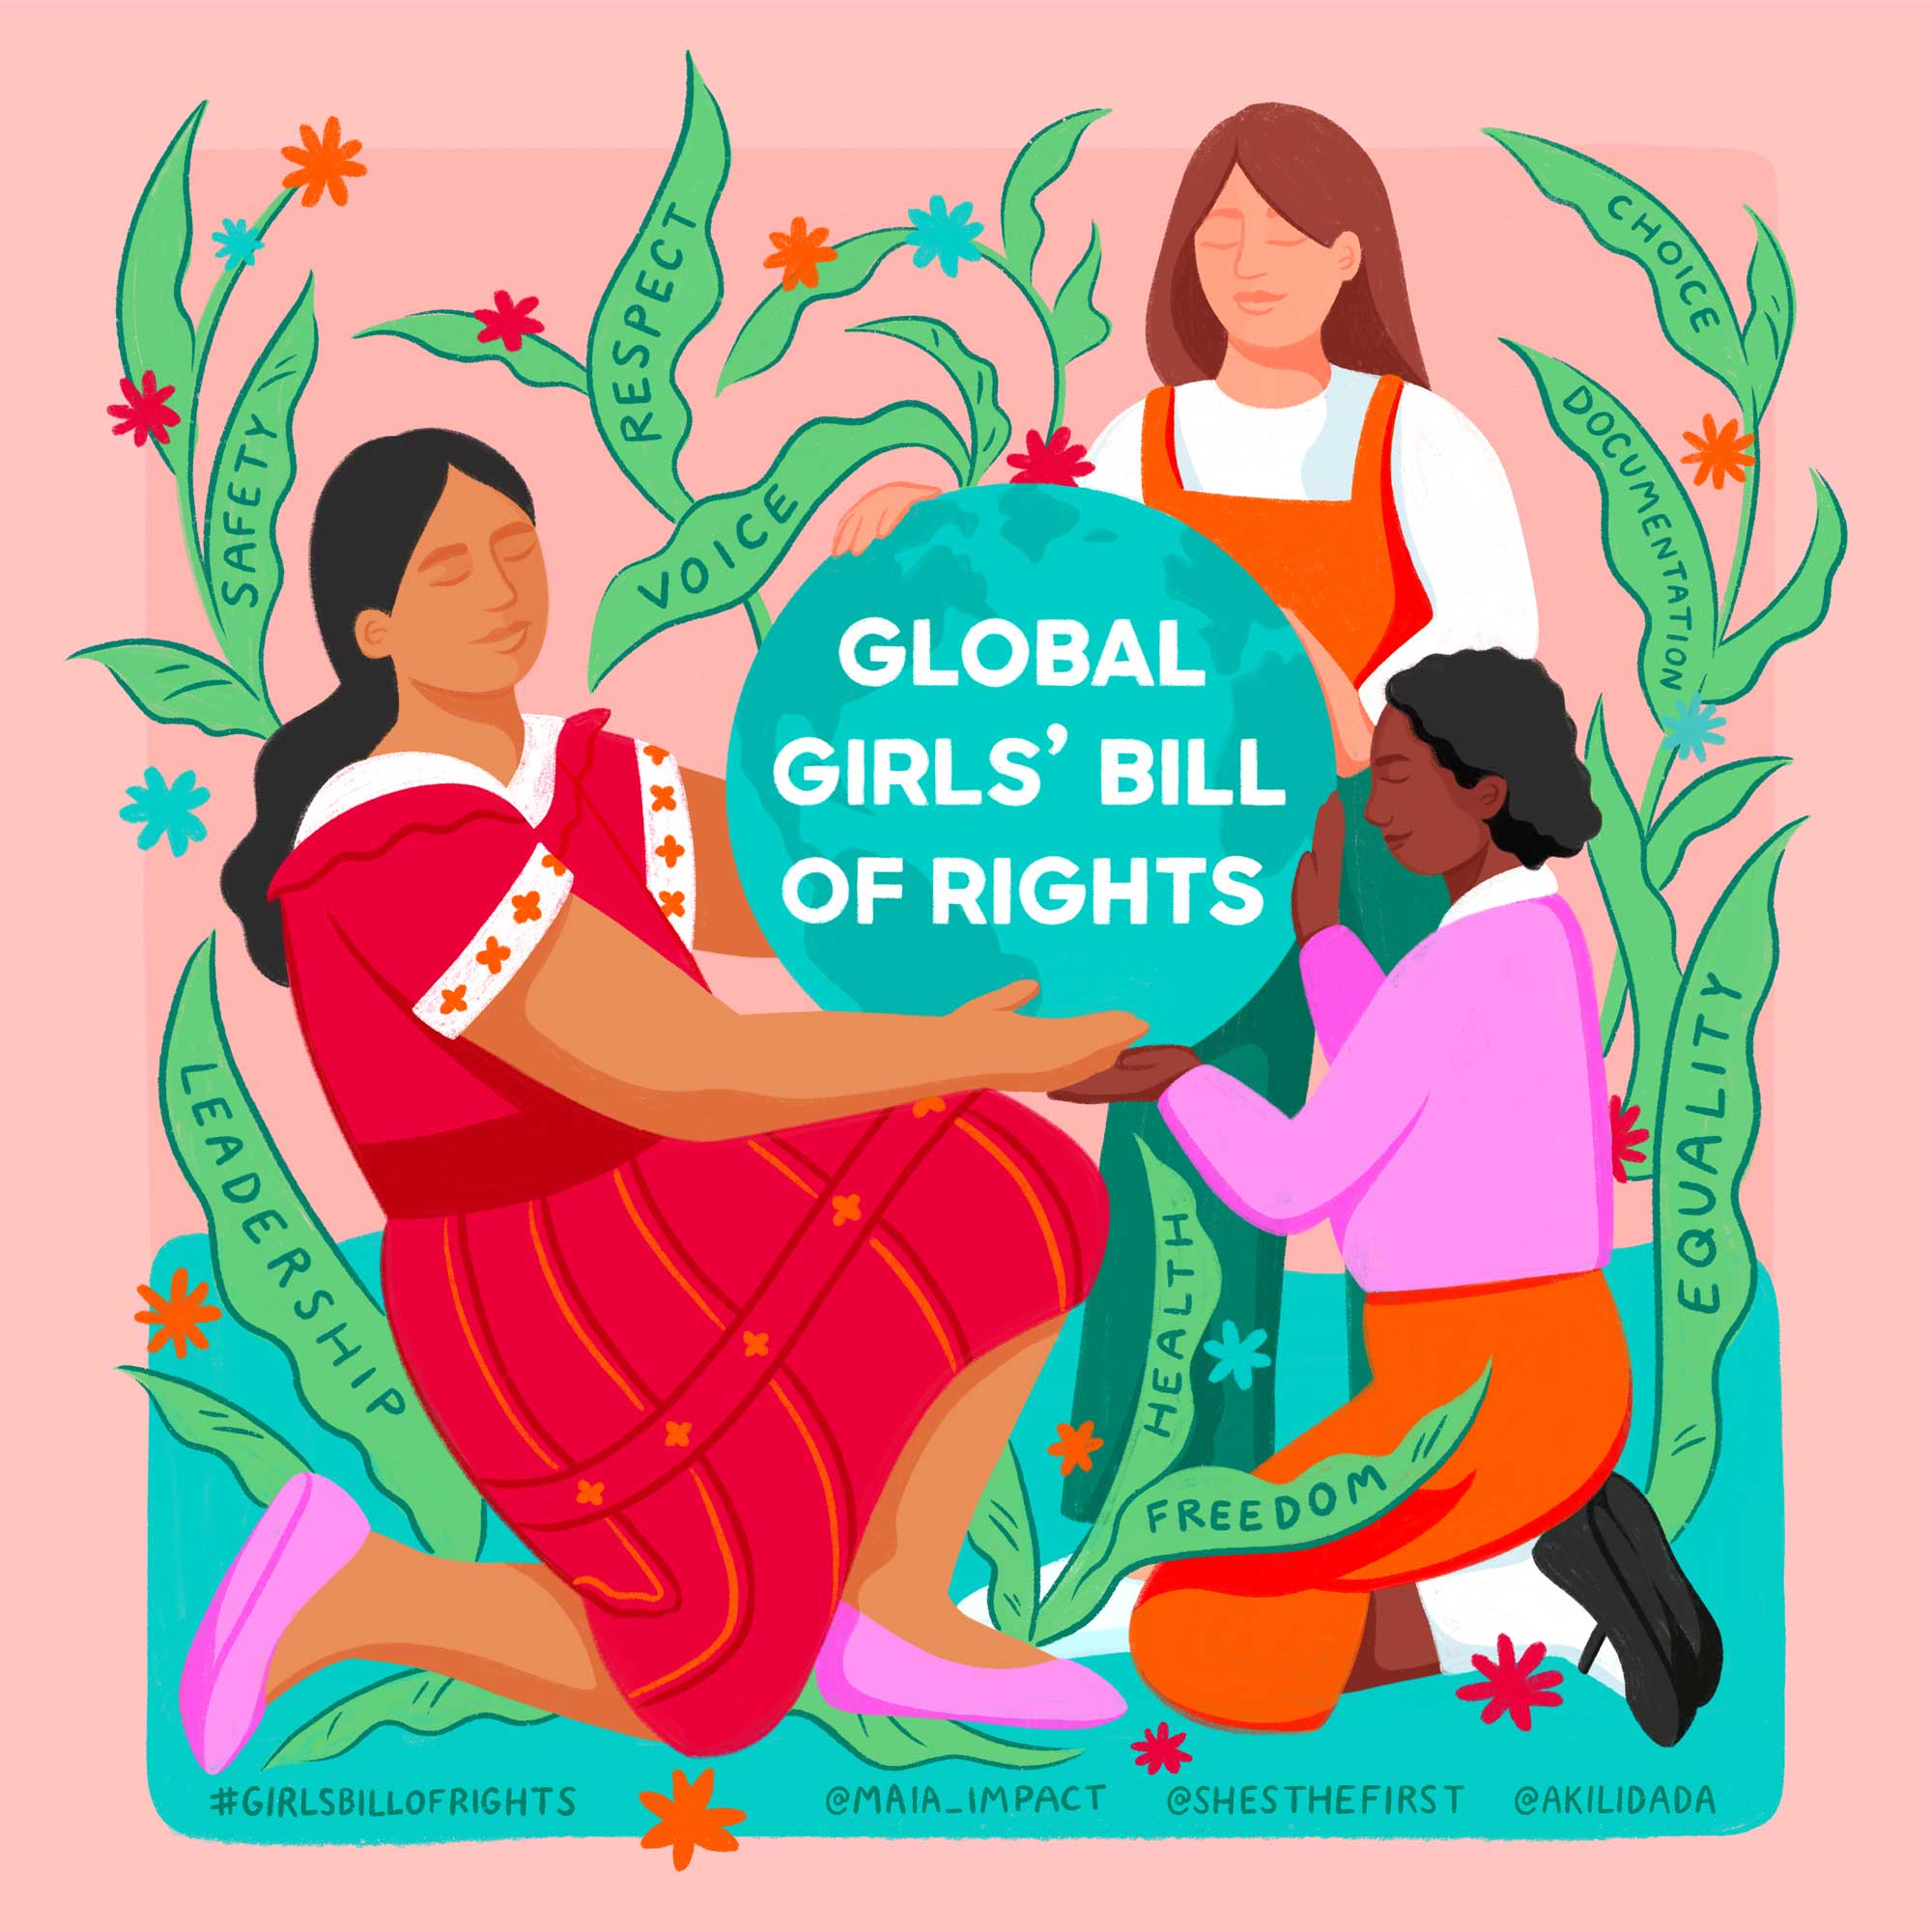 1,000+ girls all over the world have submitted their most important rights for the #GirlsBillofRights in advance of this year’s International Day of the Girl. (Illustrator: Louisa Cannell)